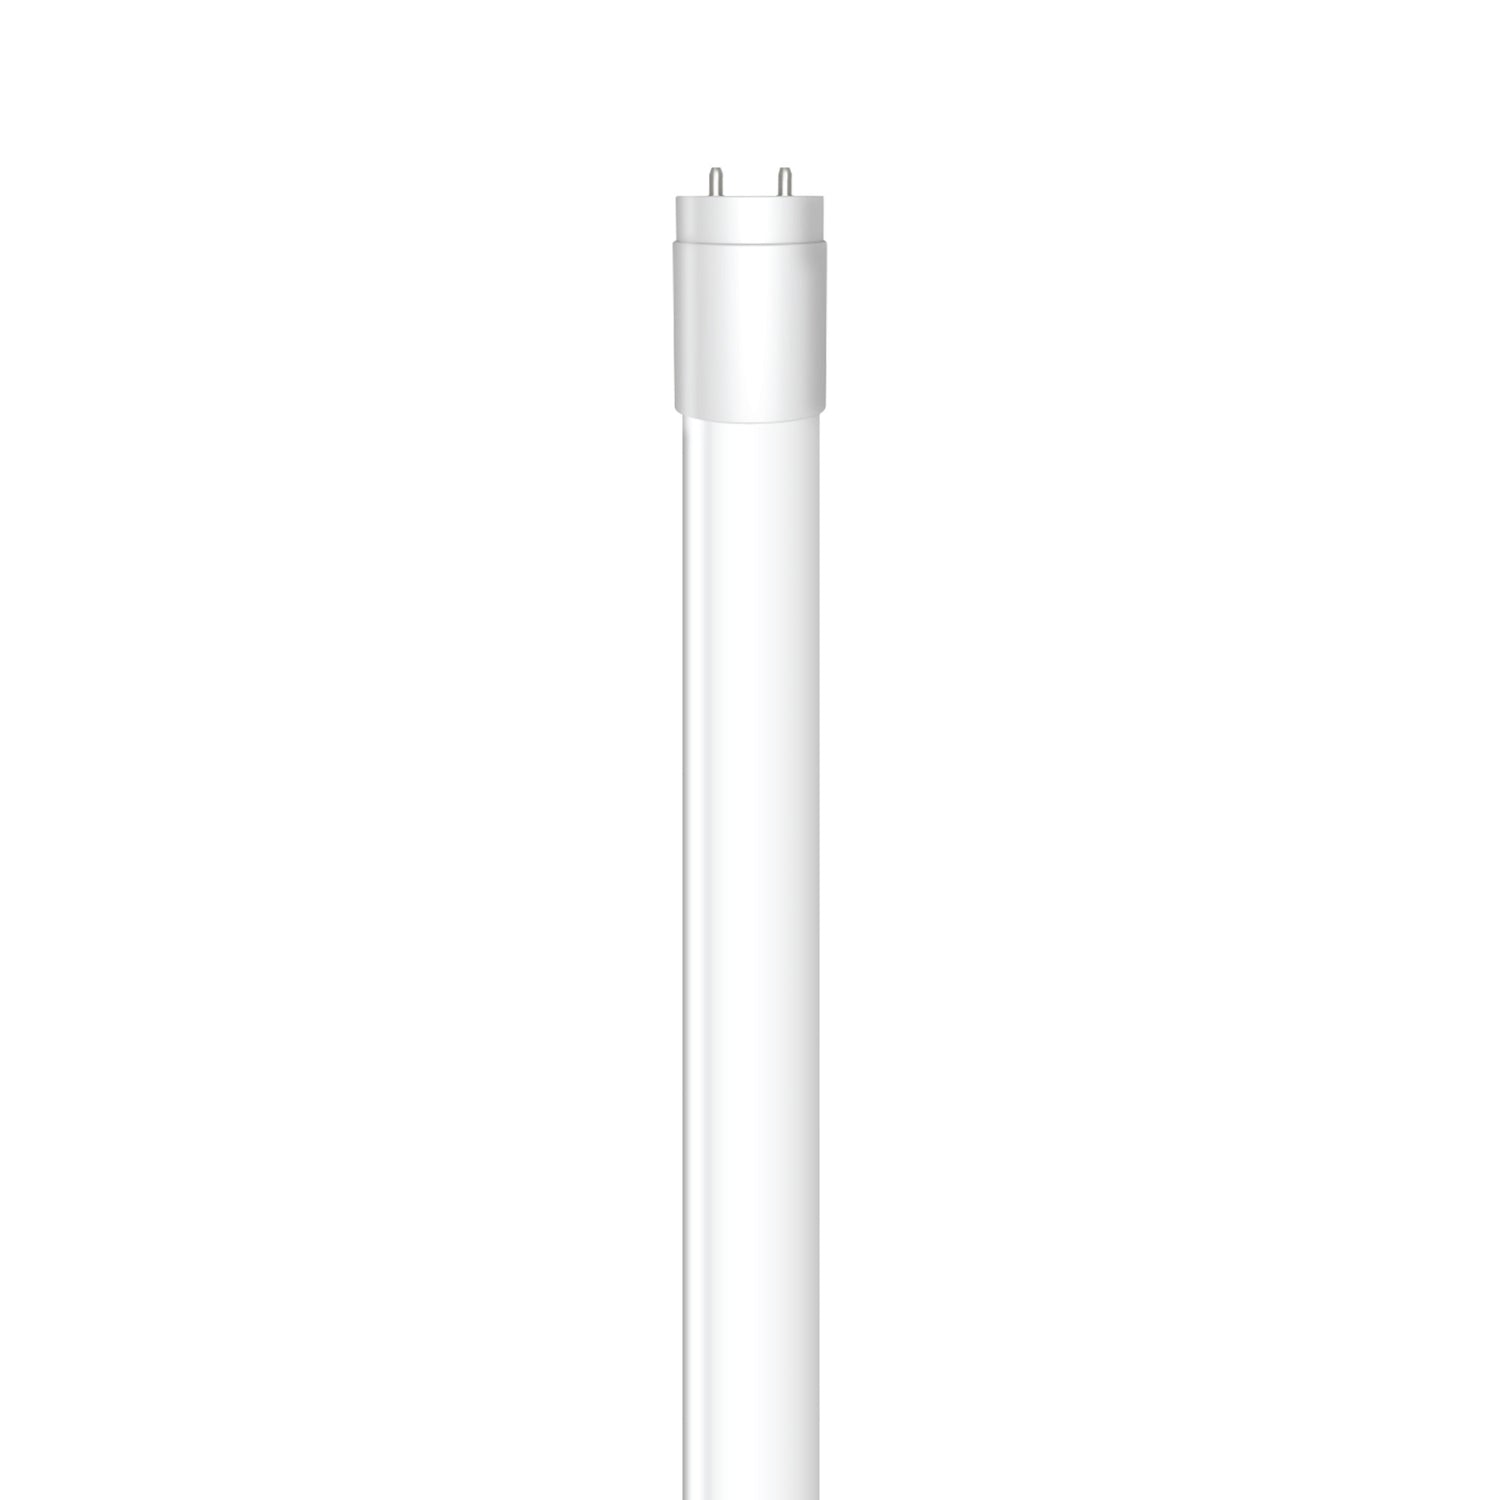 3 ft. 16W (25/30W Replacement) Daylight Deluxe (6500K) G13 Base Direct Replacement (Type A) (T8 & T12 Replacement) LED Linear Tube